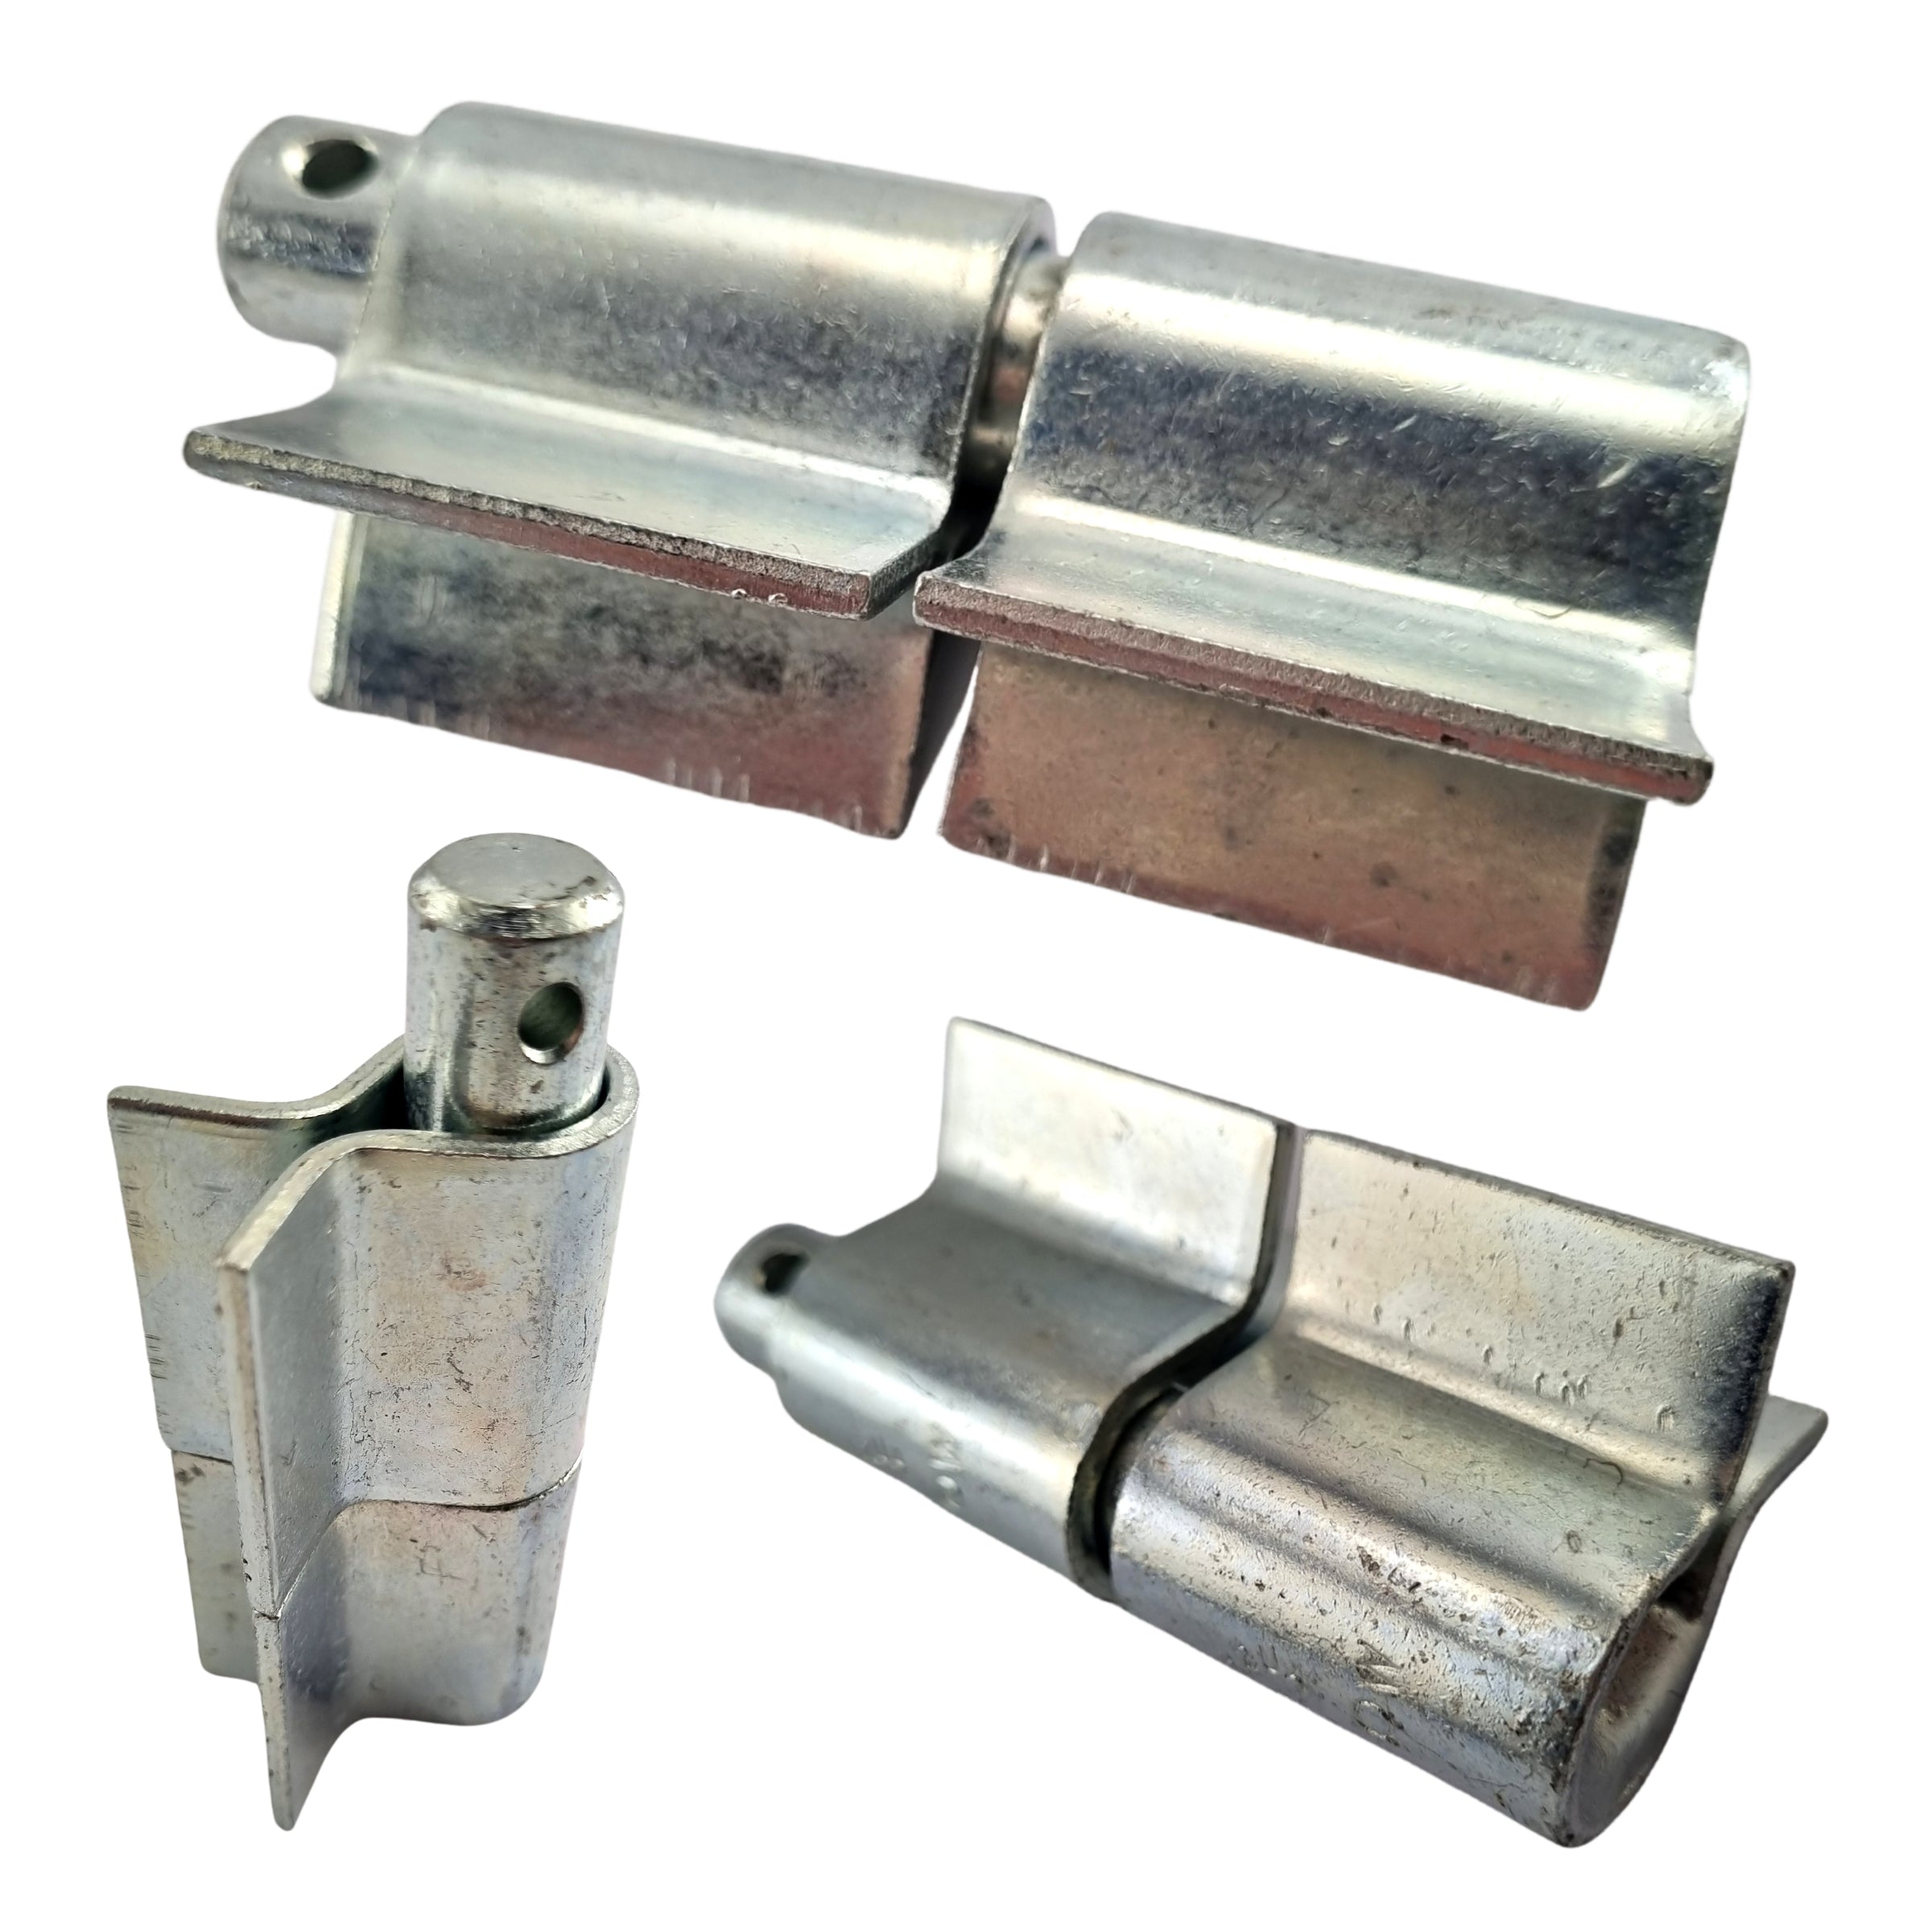 Weld On Socket - Assembly - Zinc Plated. Inc: 1 Socket + 1 Pin. Australian made. Shop fence and gate fittings and accessories online. Chain.com.au. Australia wide shipping.